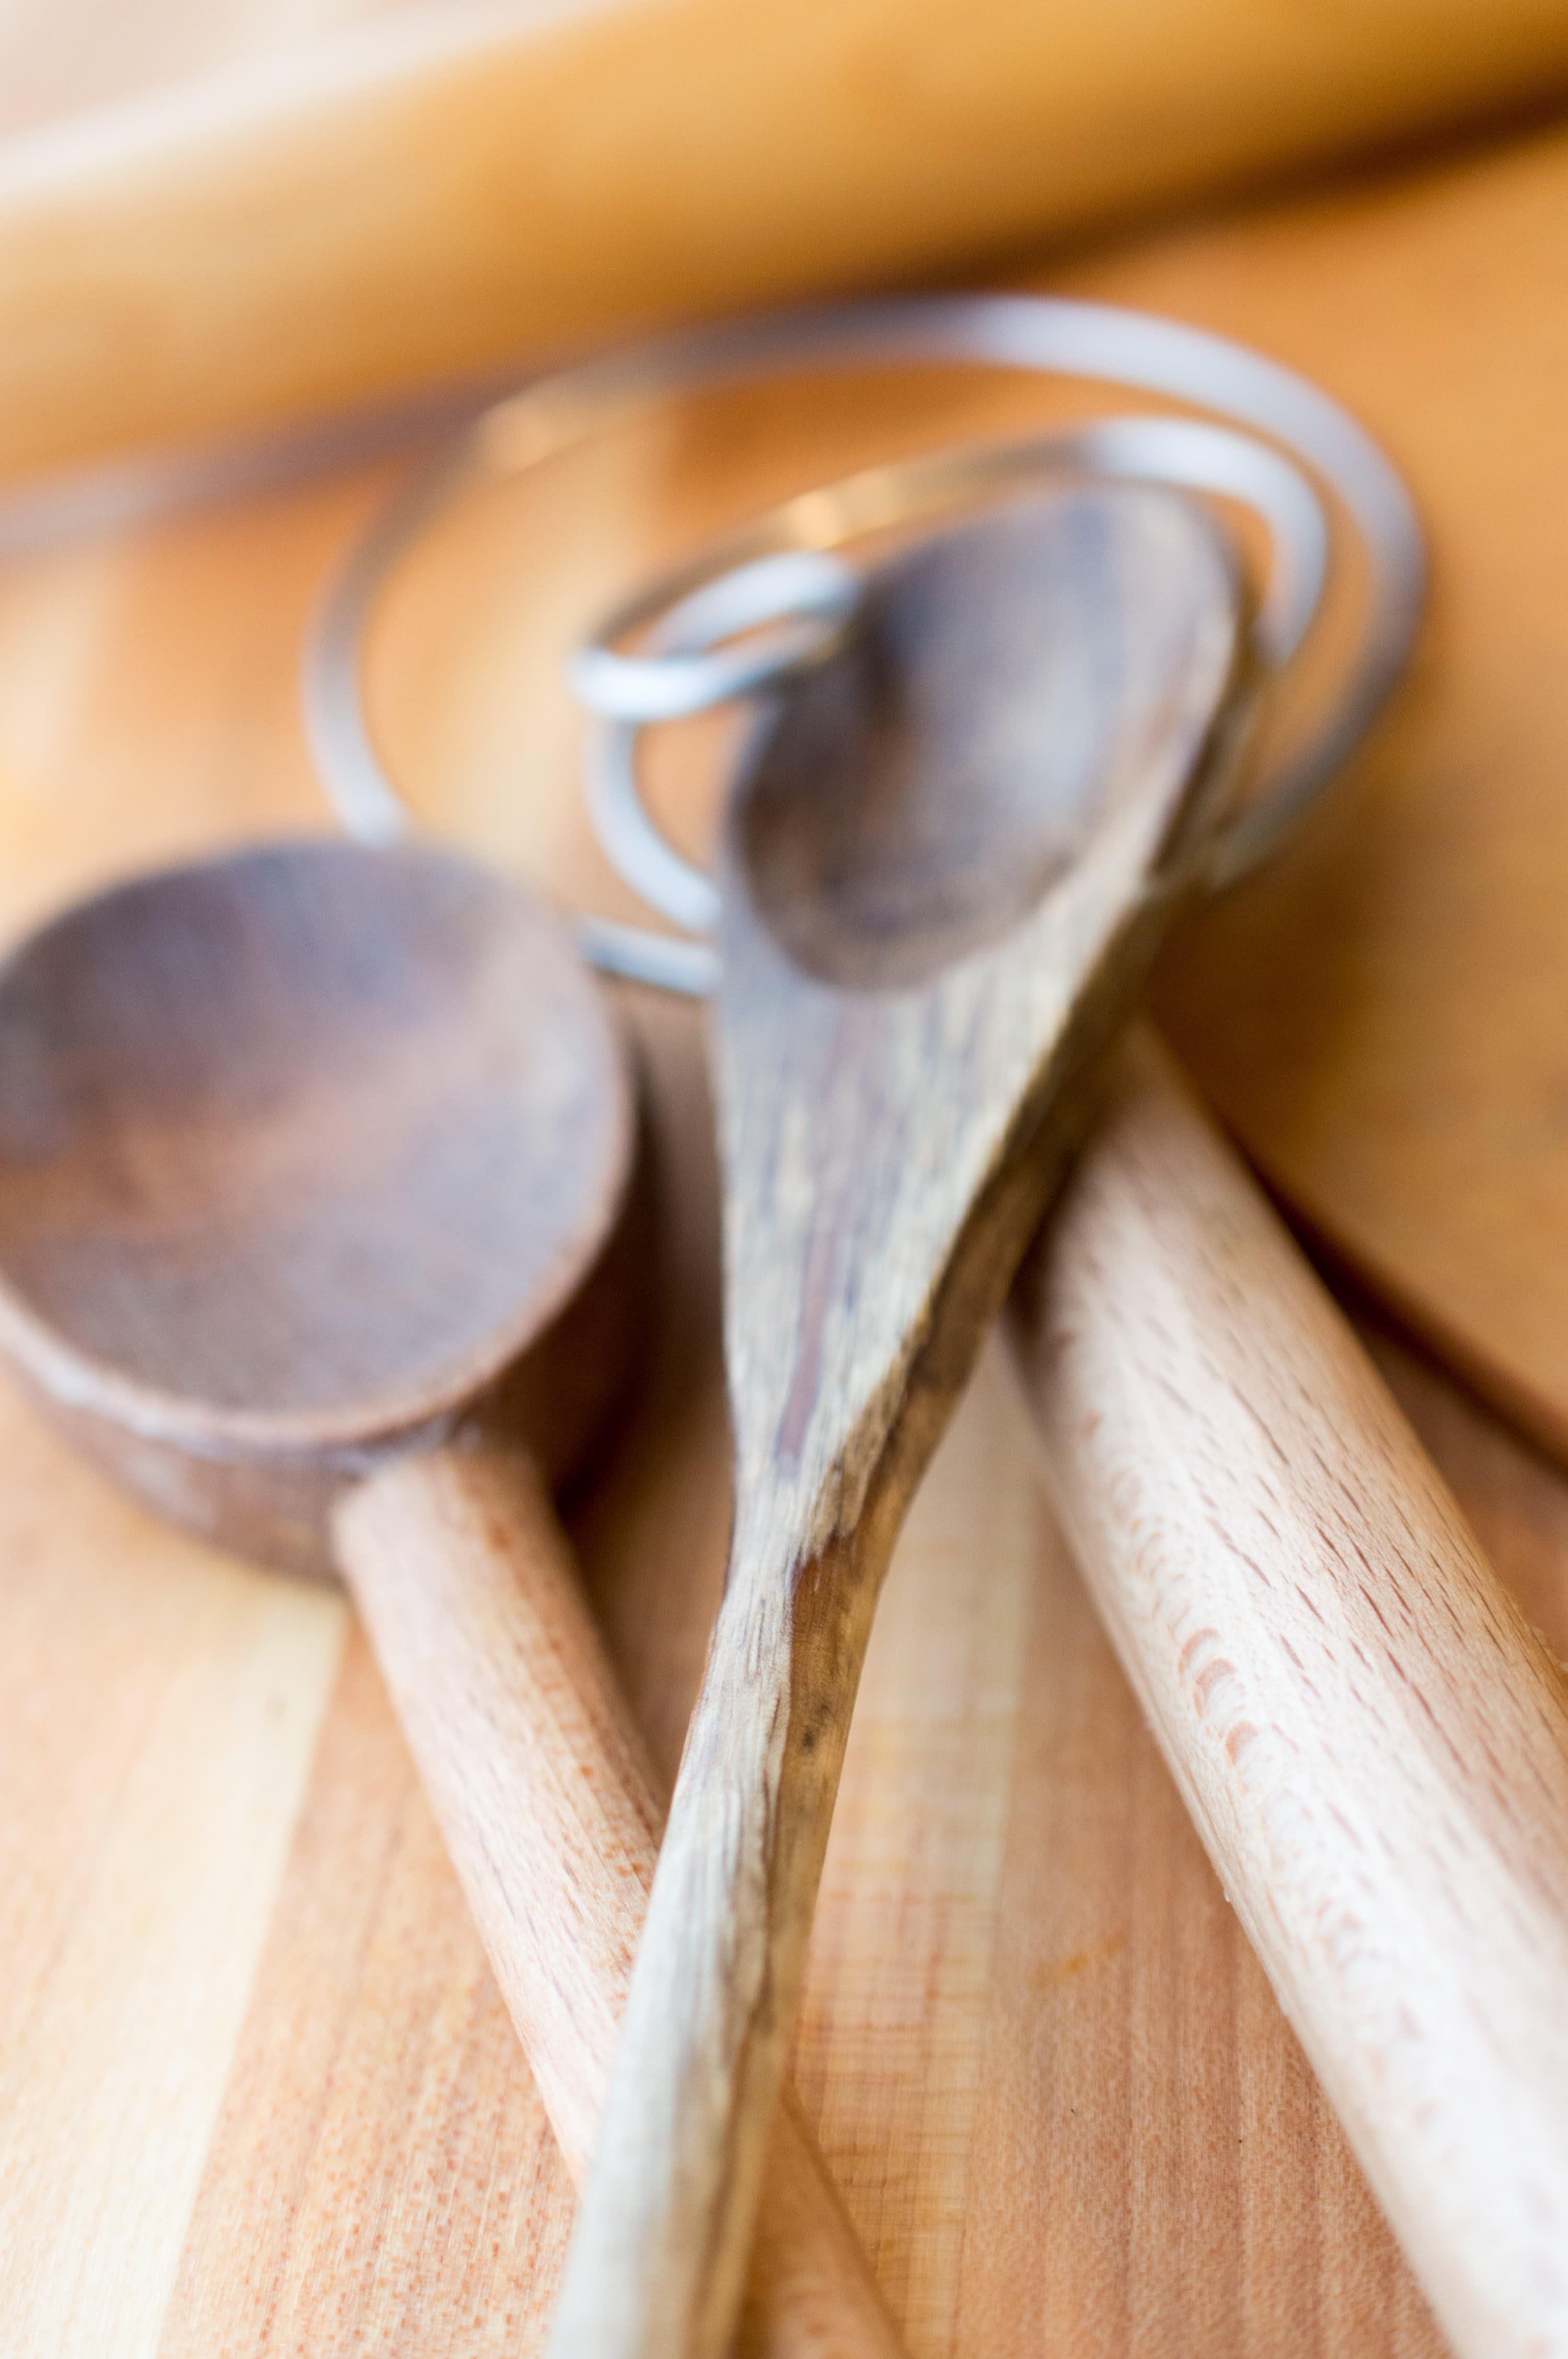 The Best Way to Oil Wooden Spoons and Cutting Boards